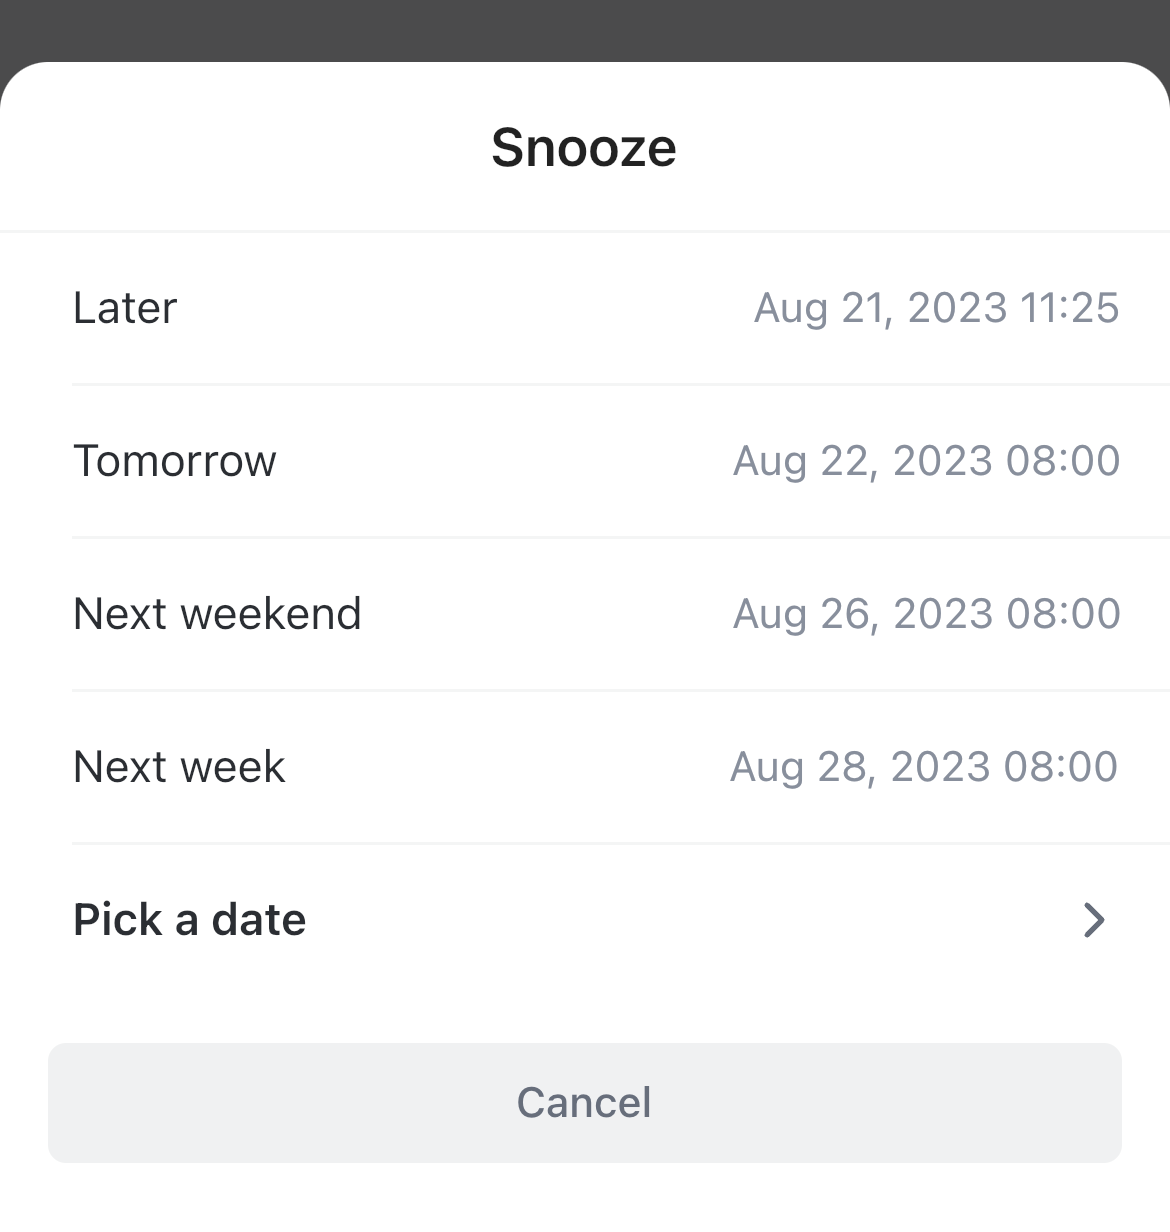 Screenshot of someone snoozing a notification.